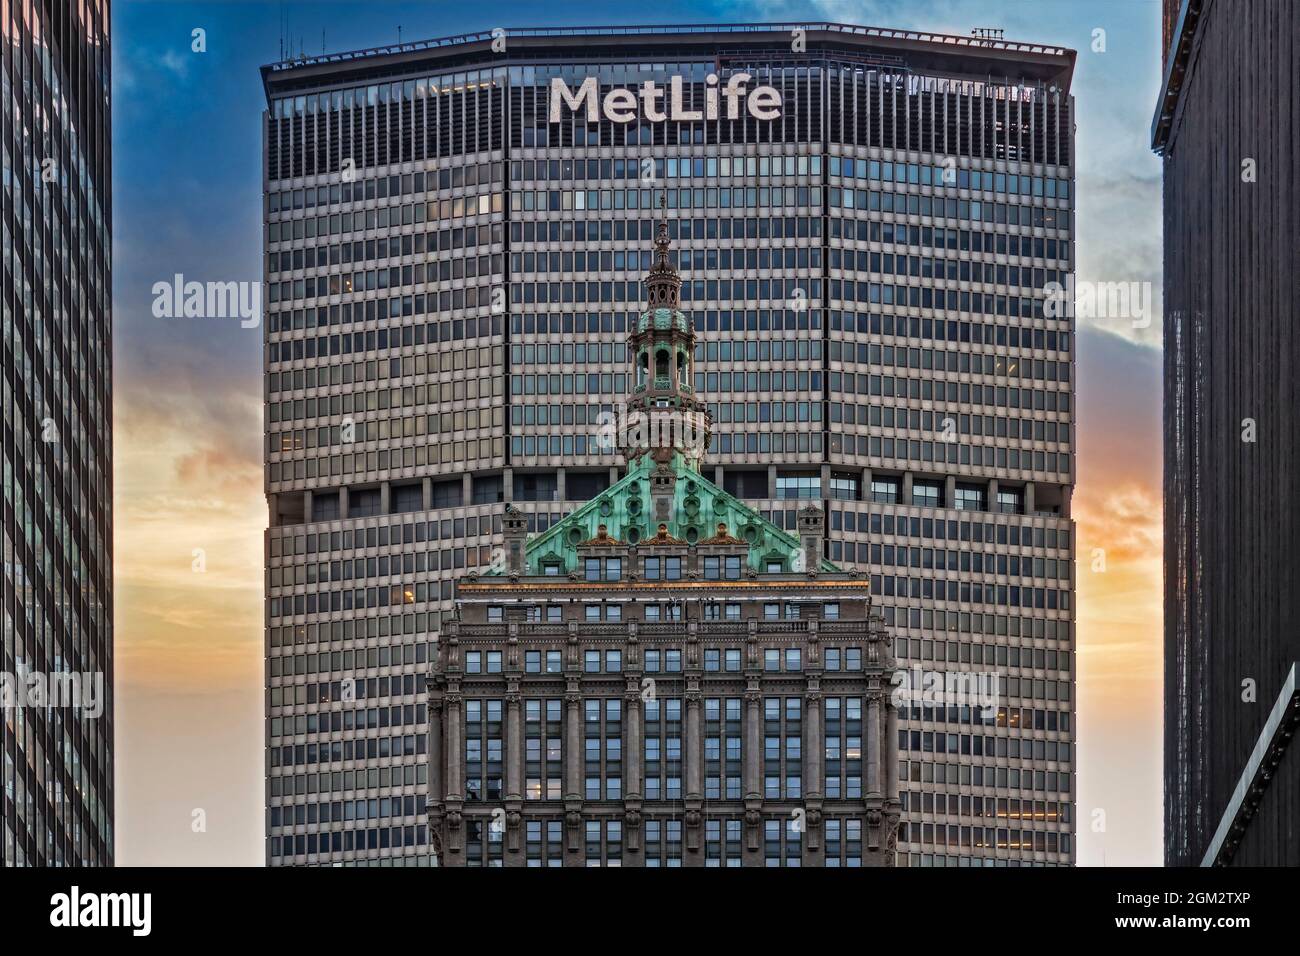 Hemsley and Met Life Building NYC - View to the ornate cupola of the iconic New York City Landmark. The pyramidal shape top of the Hemsley Building is Stock Photo